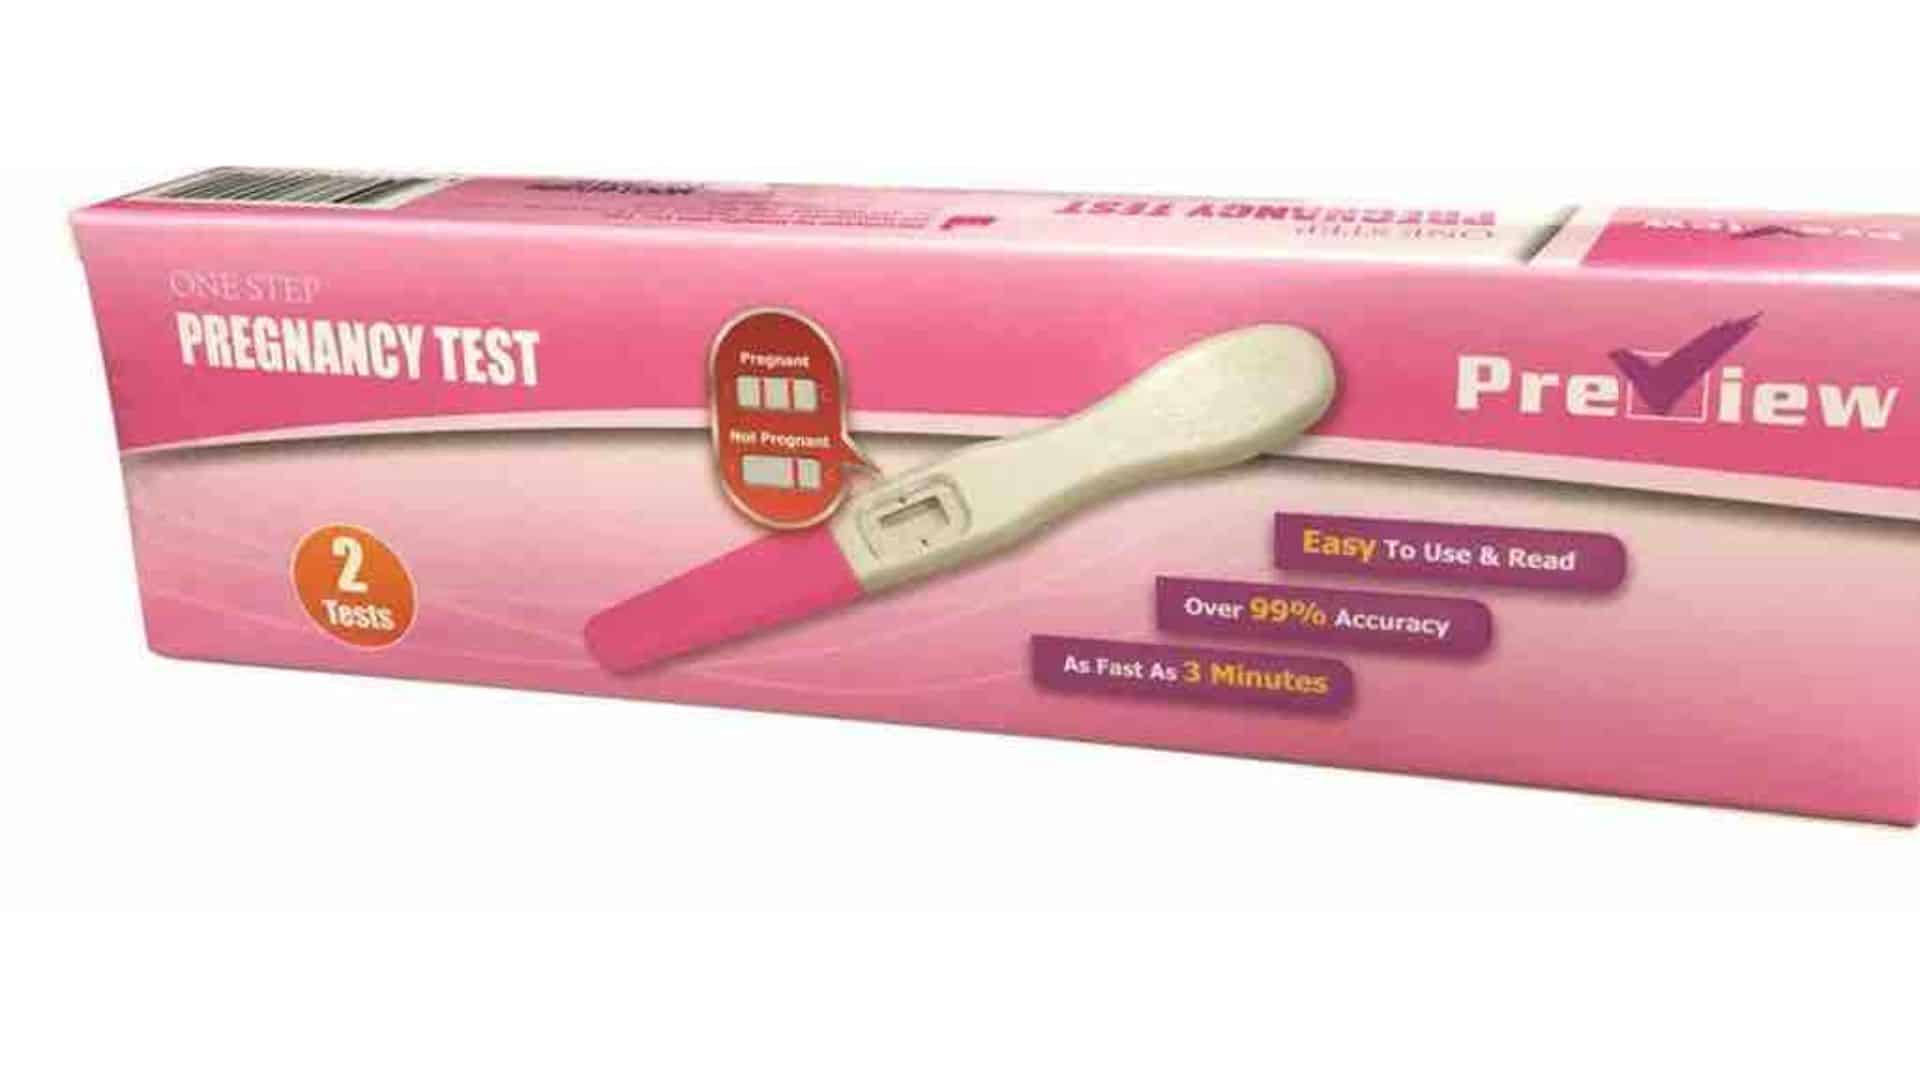 Preview Pregnancy Test Review